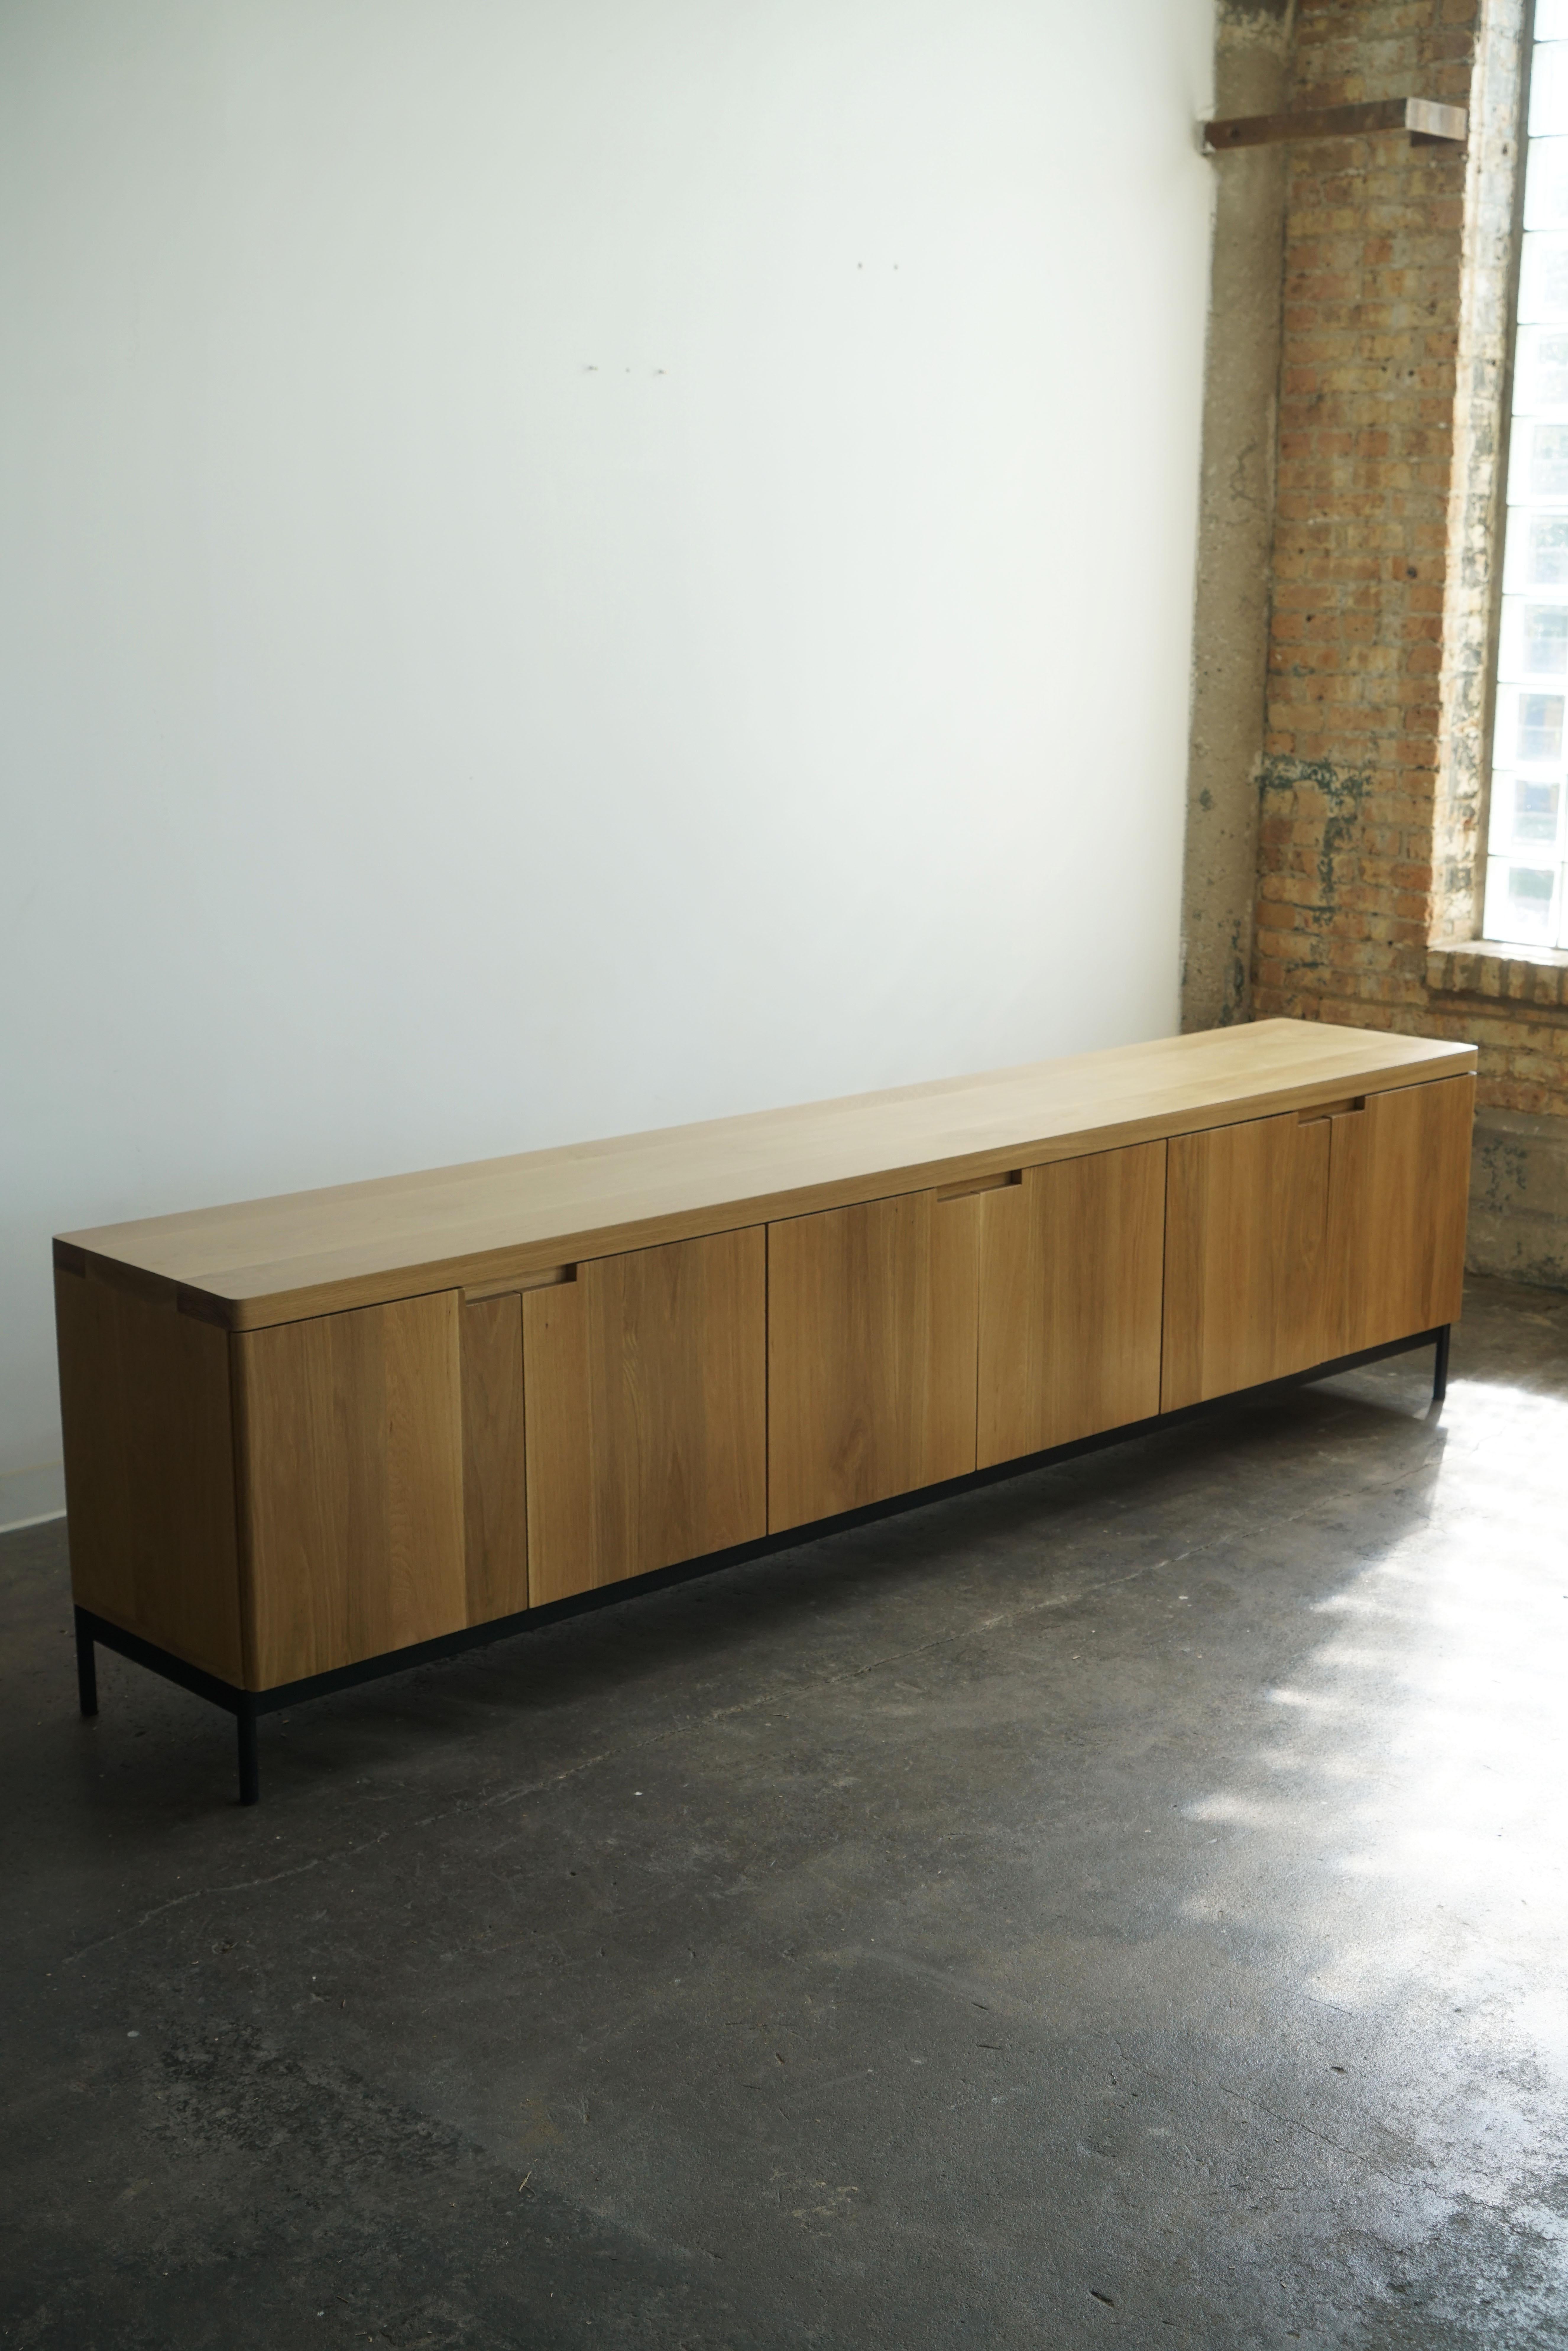 Contemporary solid white oak credenza in a natural finish.
Complete with (6) soft-close doors, adjustable shelves inside, and a steel base. 

Credenza pictured has dimensions of: 108” L x 19” D x 29” H.

This piece is made-to-order, and custom